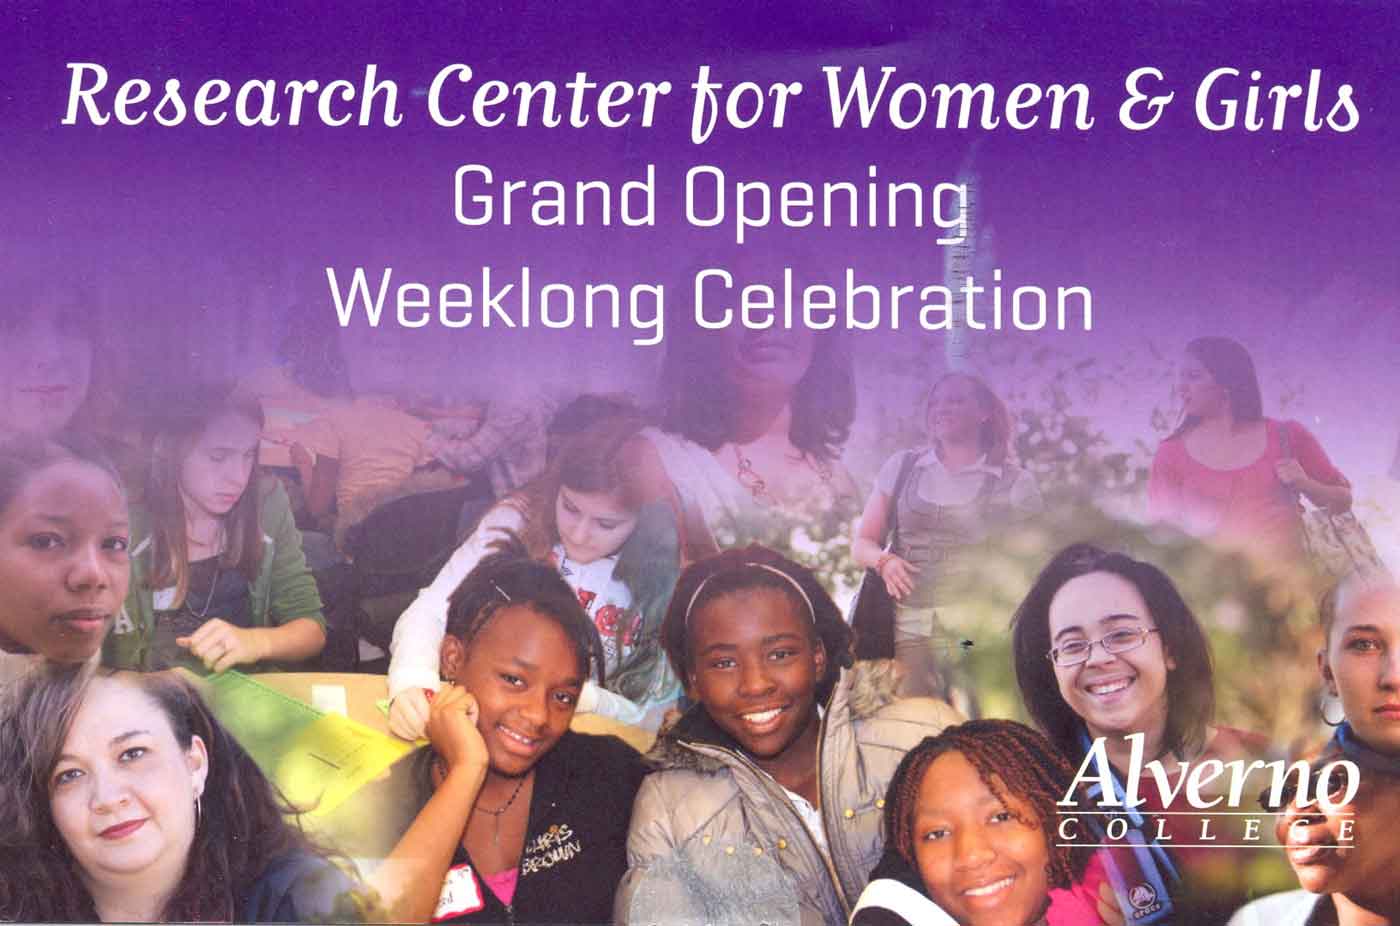 Alverno's Research Center for Women and Girls Grand Openoing Brochure